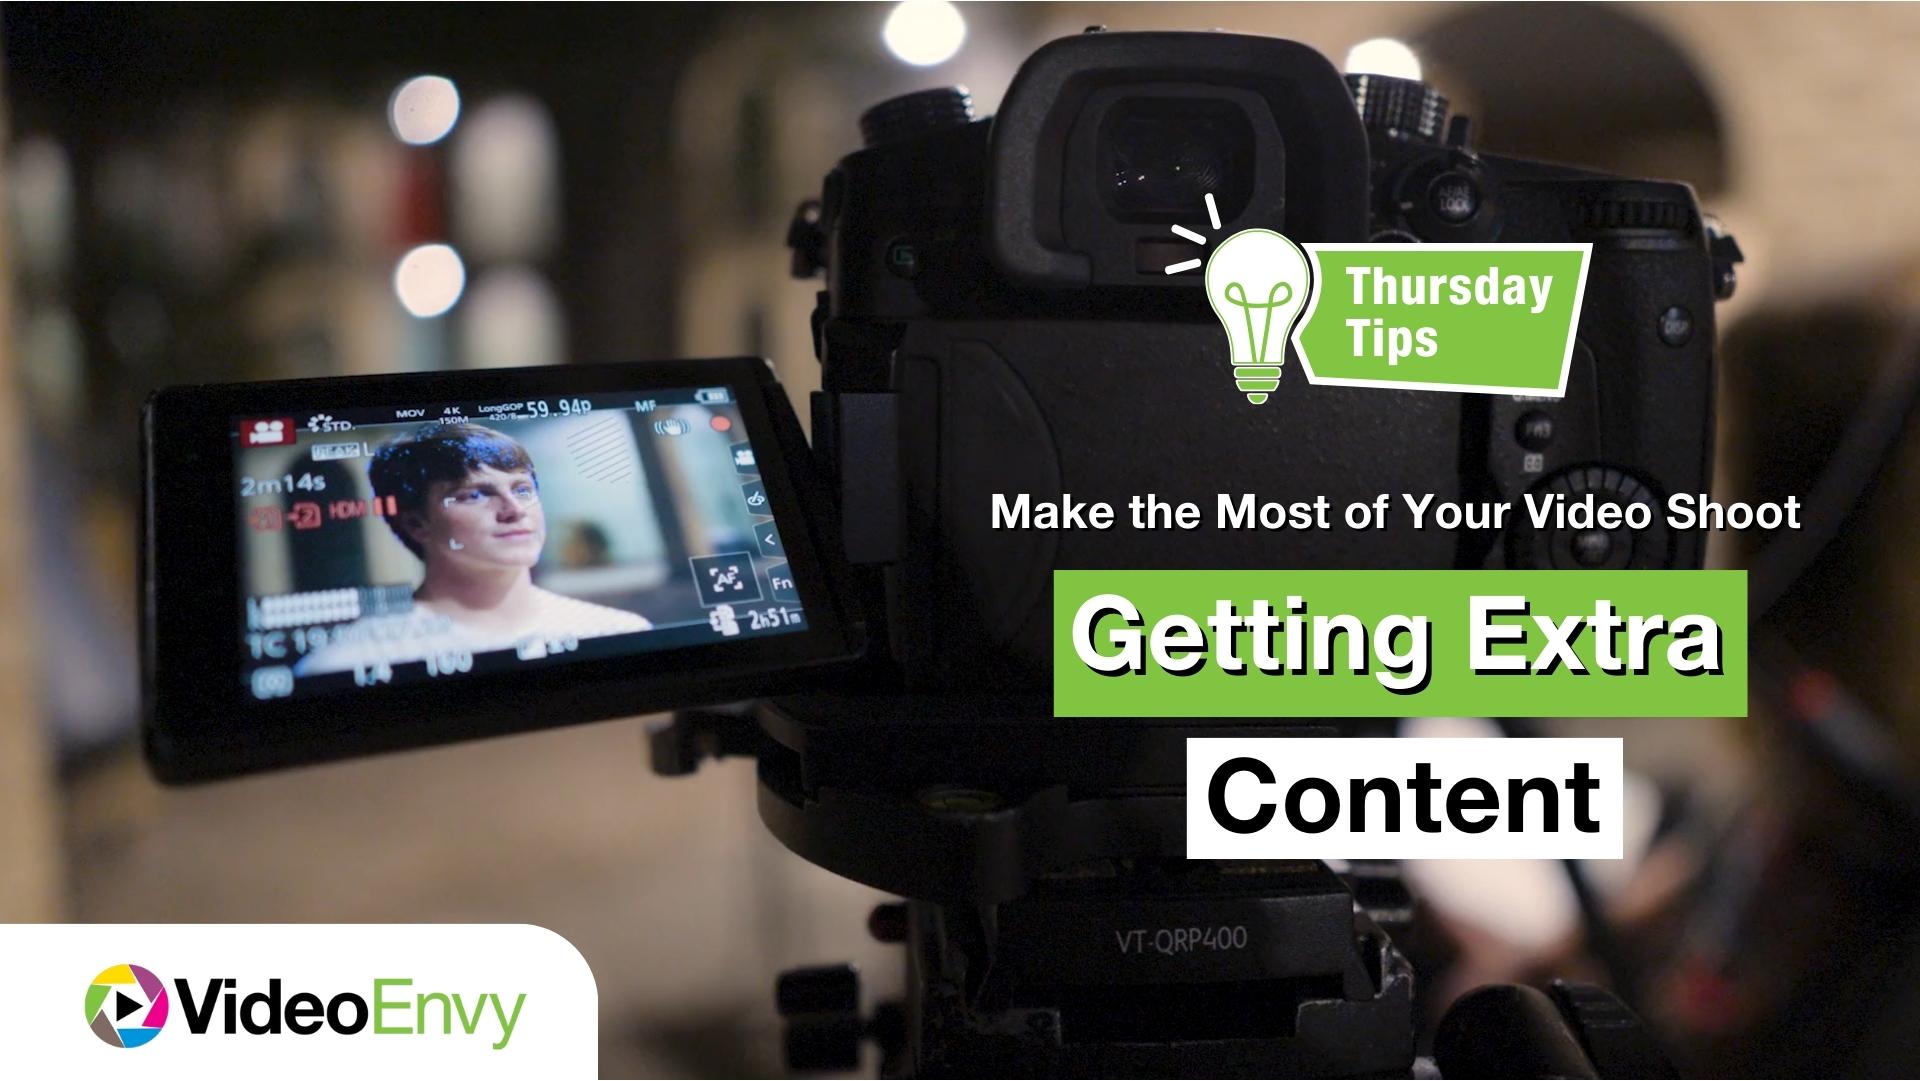 Thursday Tips: Getting Extra Content